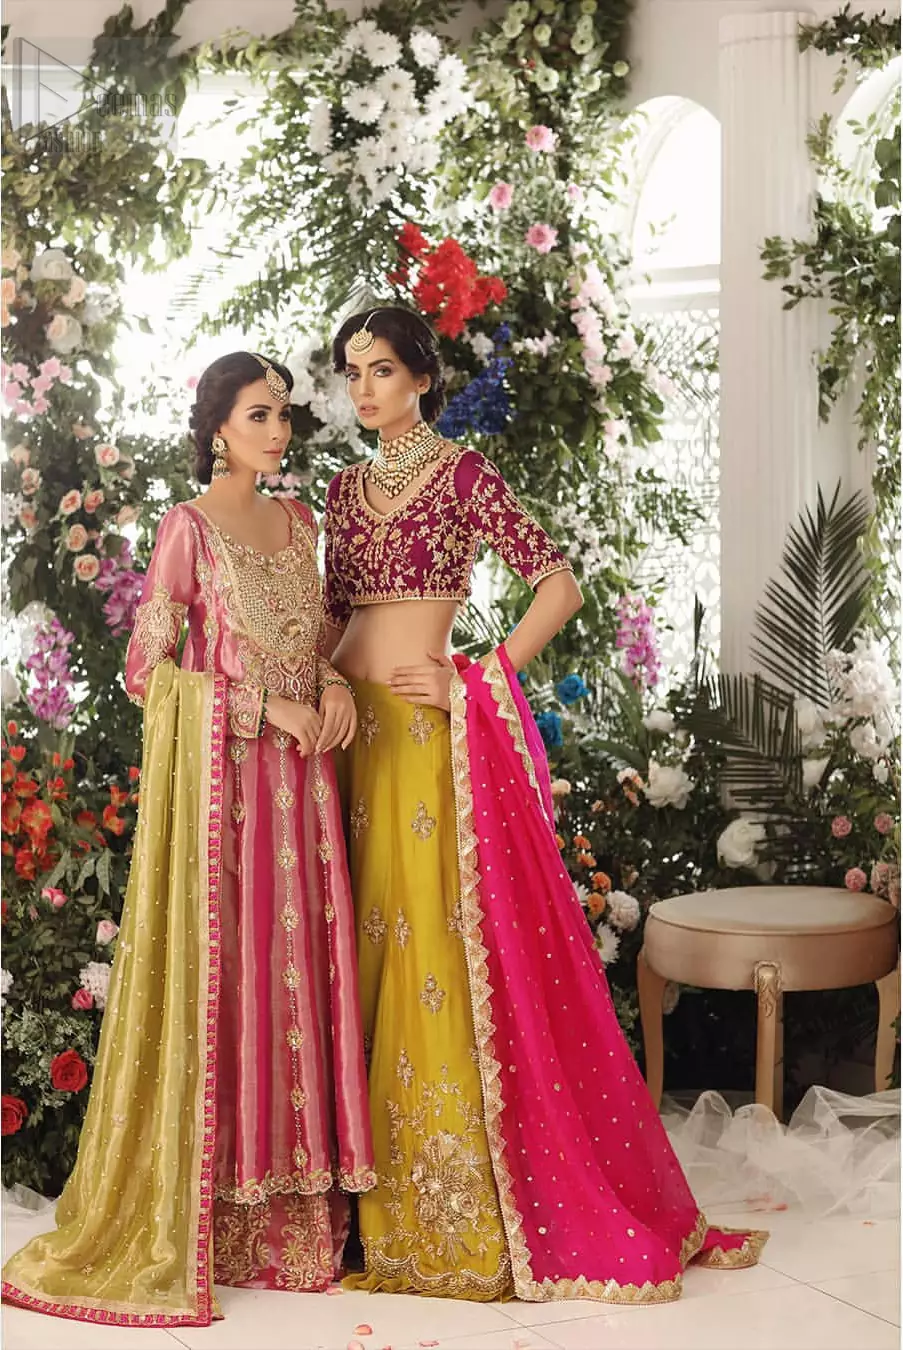 Adorn yourself with this breath-taking mehndi lehenga outfit. This beautiful mehndi dress comes with yellow lehenga with scattered beautiful embellished motifs and floral booties around a large central motif and it finished with frilled border. It is coordinated with a beautiful plum blouse adorned with zardozi work in the shades of golden and silver. Style it up with pink organza dupatta with sequins sprayed all over it along with gota finishing on all four sides.